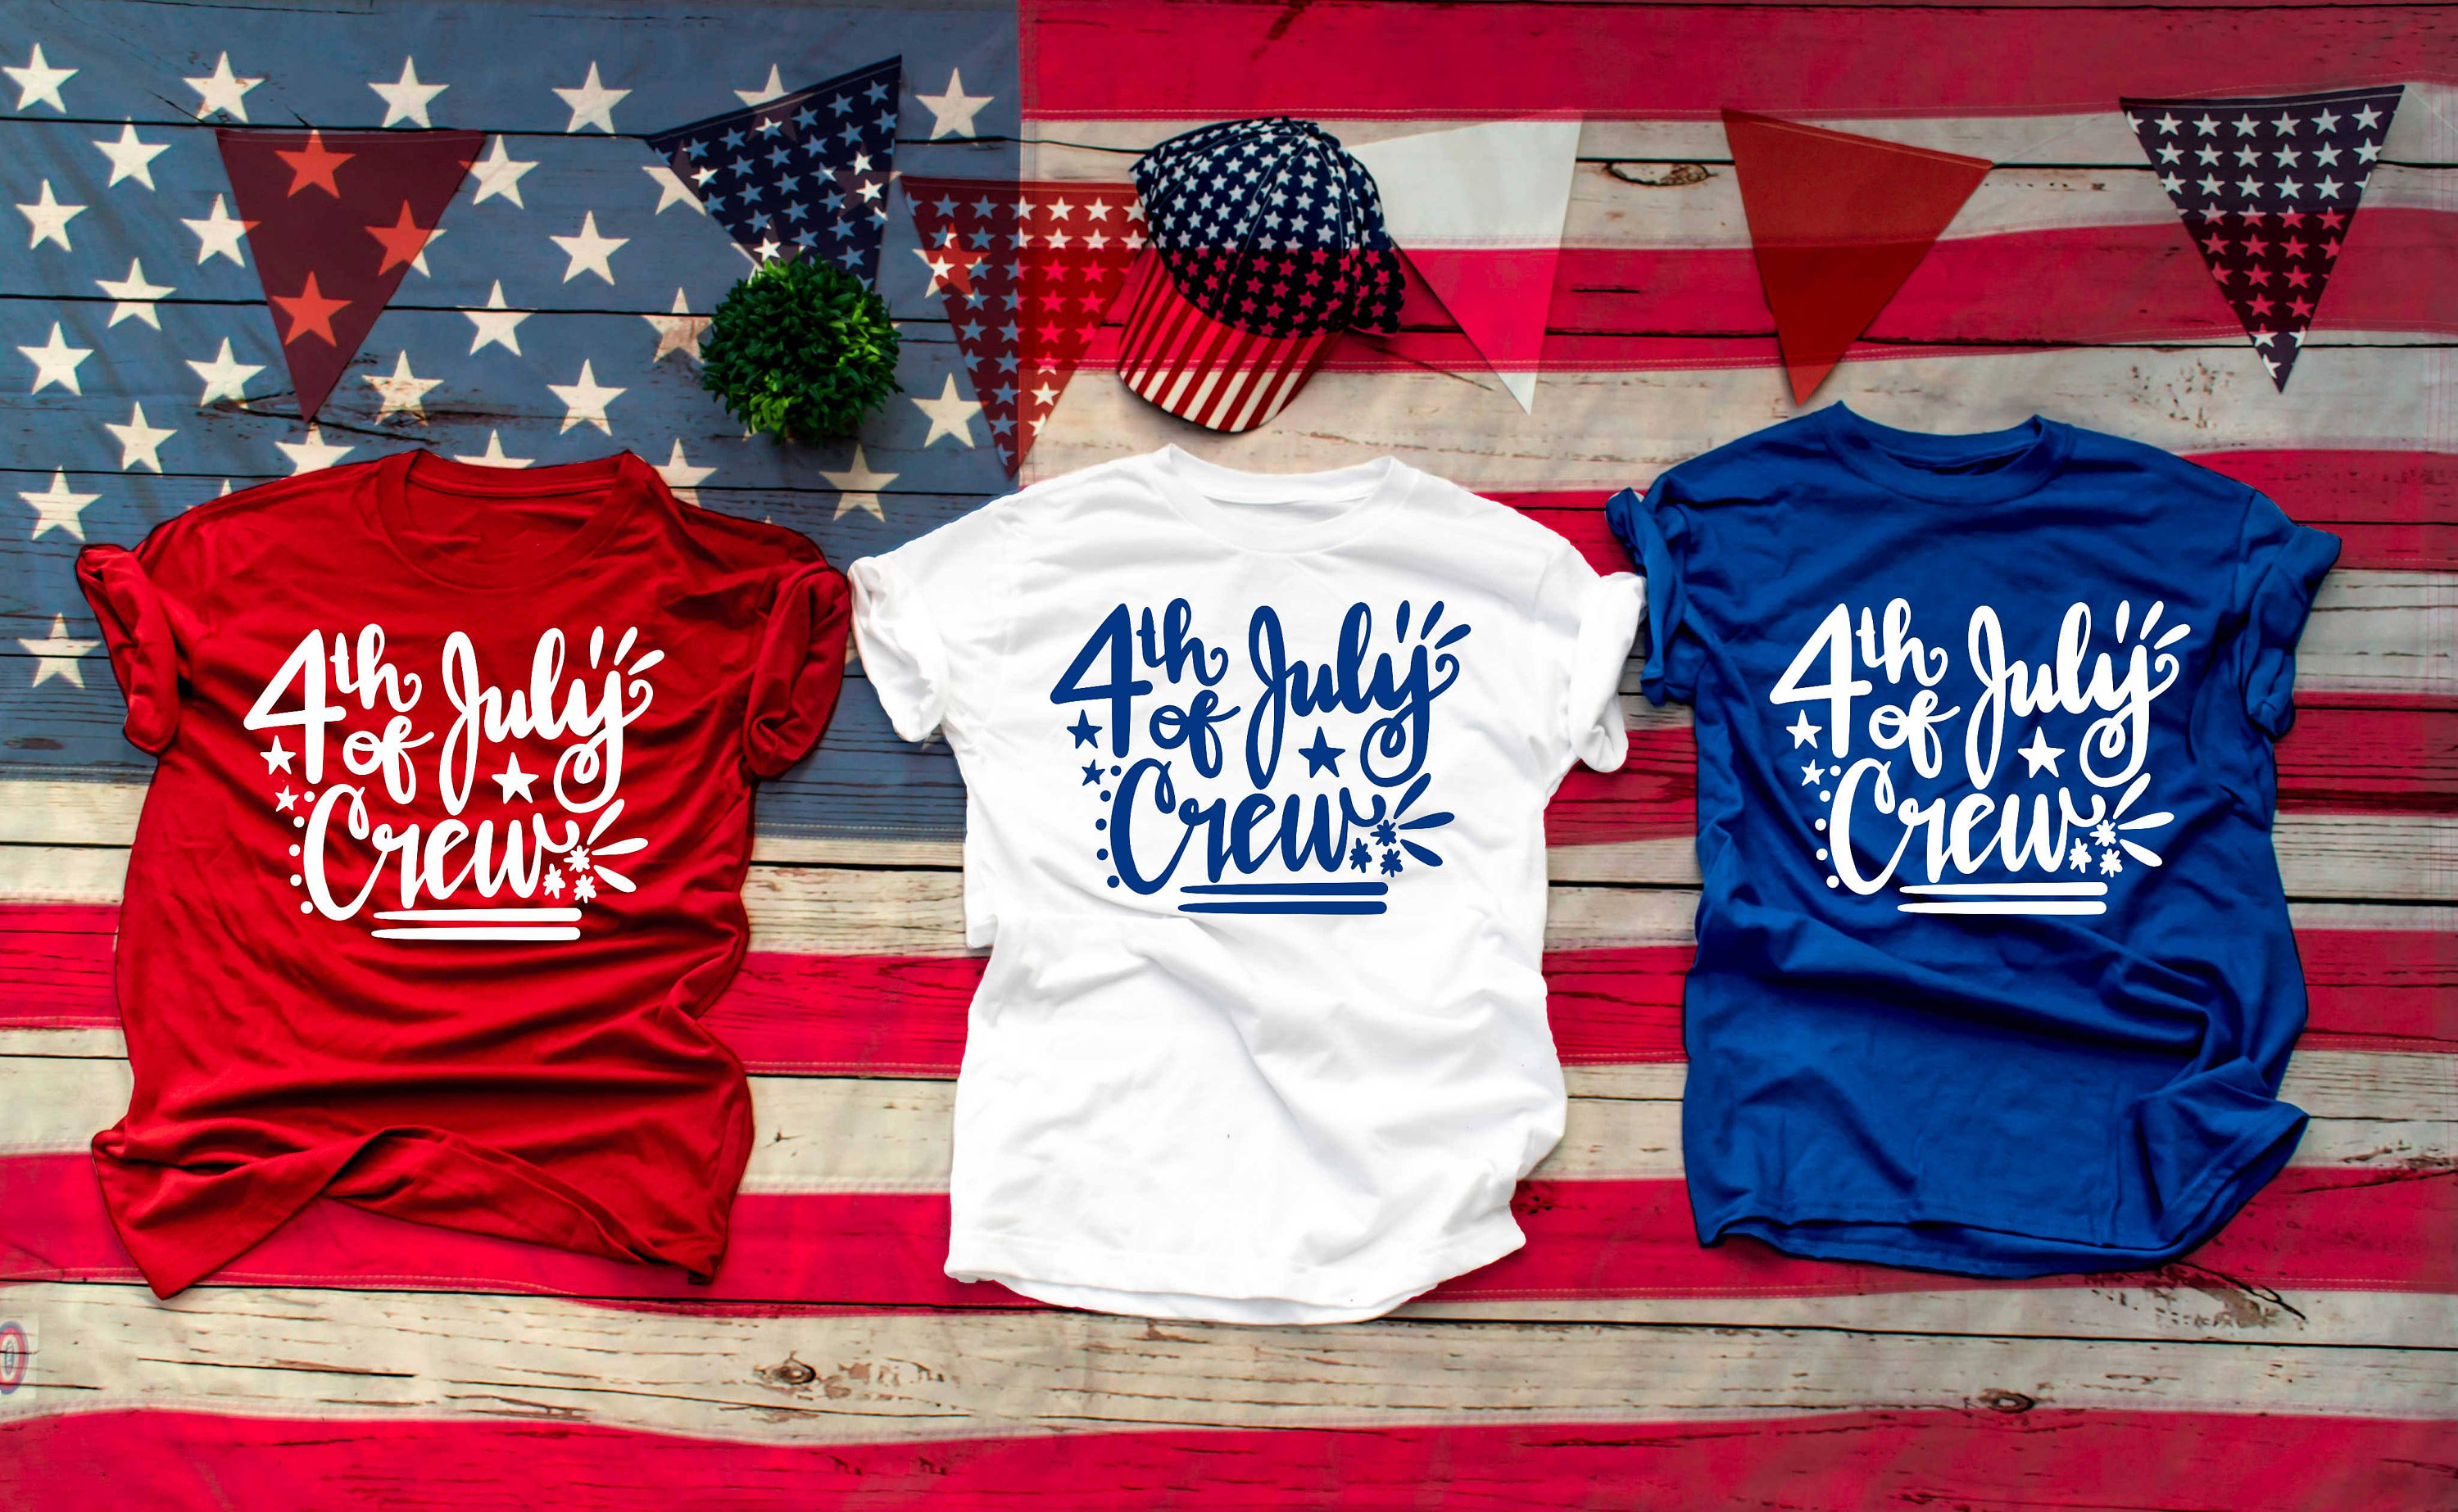 Arabella Creations 4th of July Crew.family Shirts.independence Day. 4th July Shirt.red White and Blue.july4th.crew Shirts. Independence Day. Shipping.